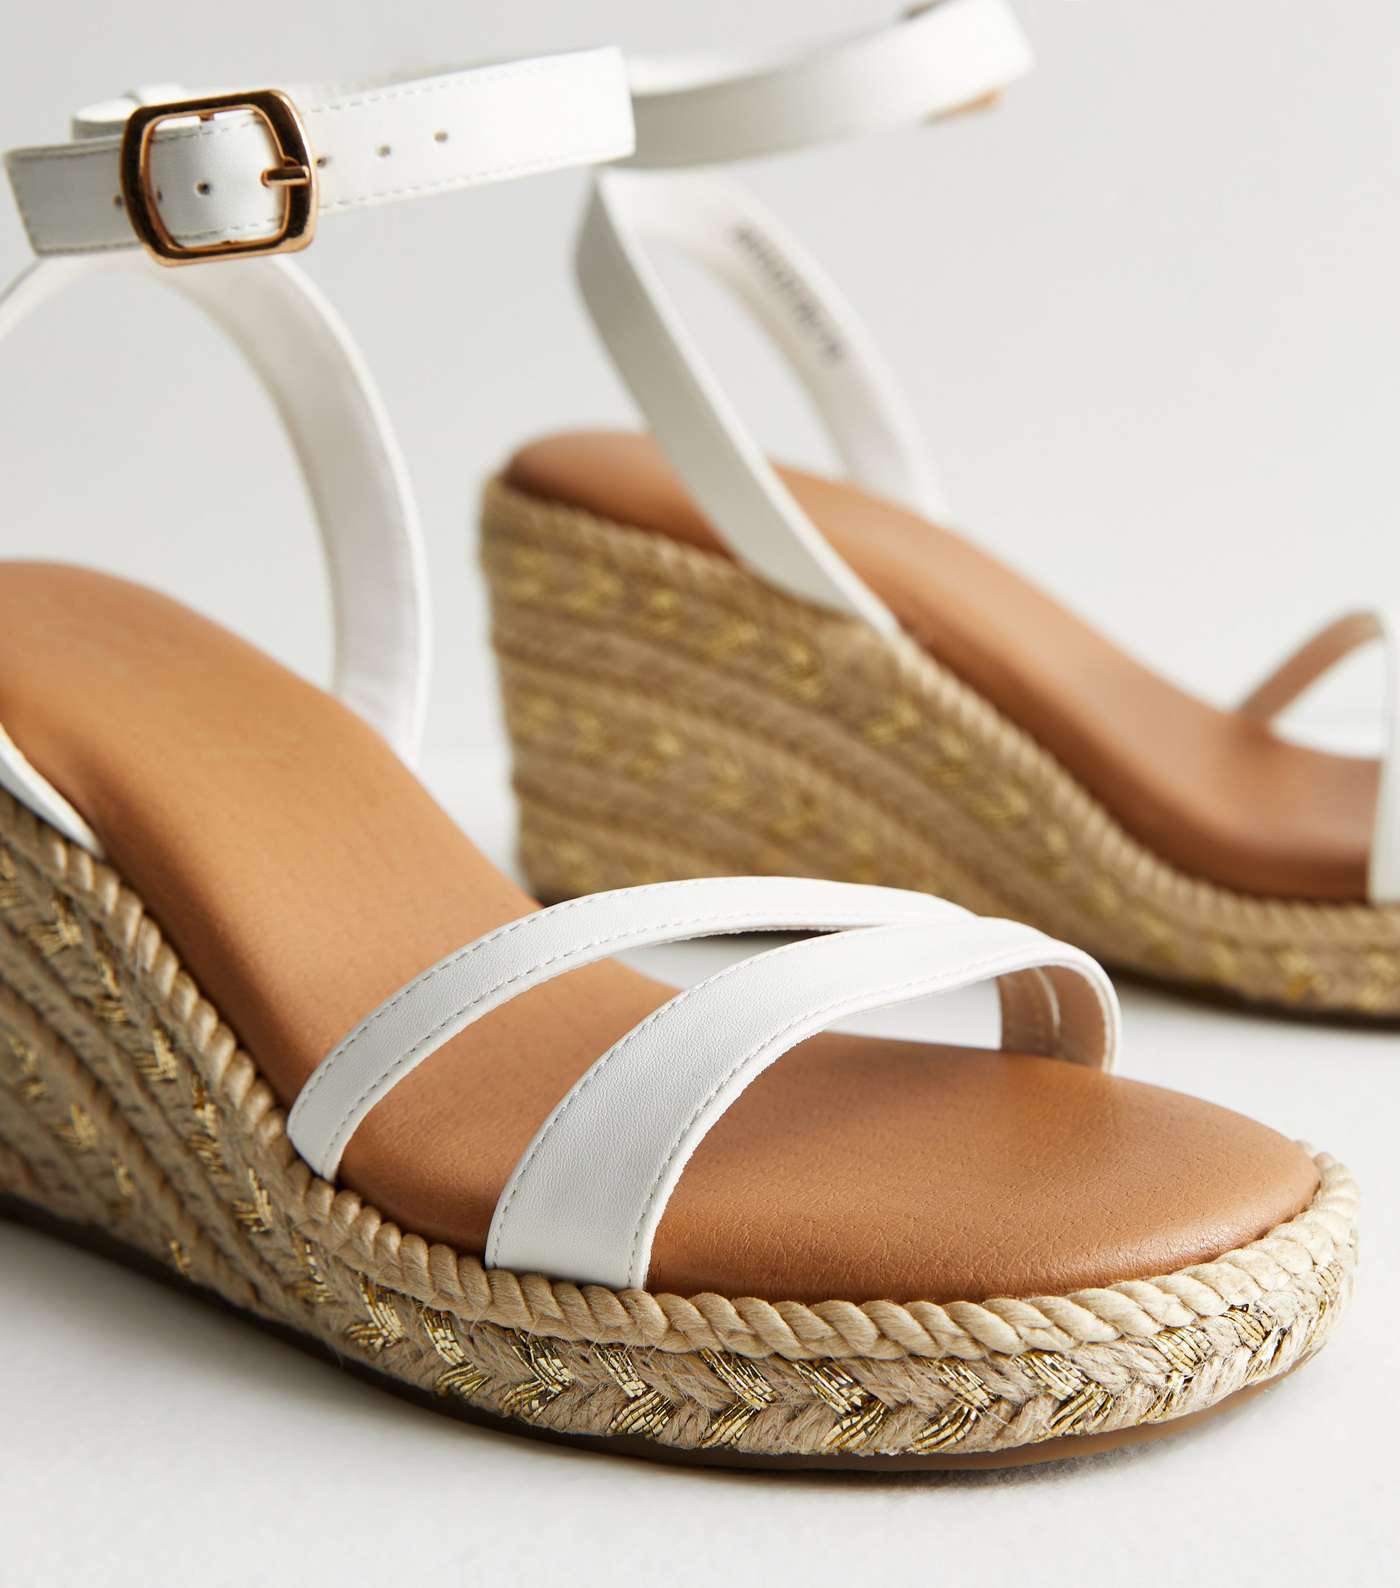 White Leather-Look Strappy Espadrille Wedge Heel Sandals Image 5